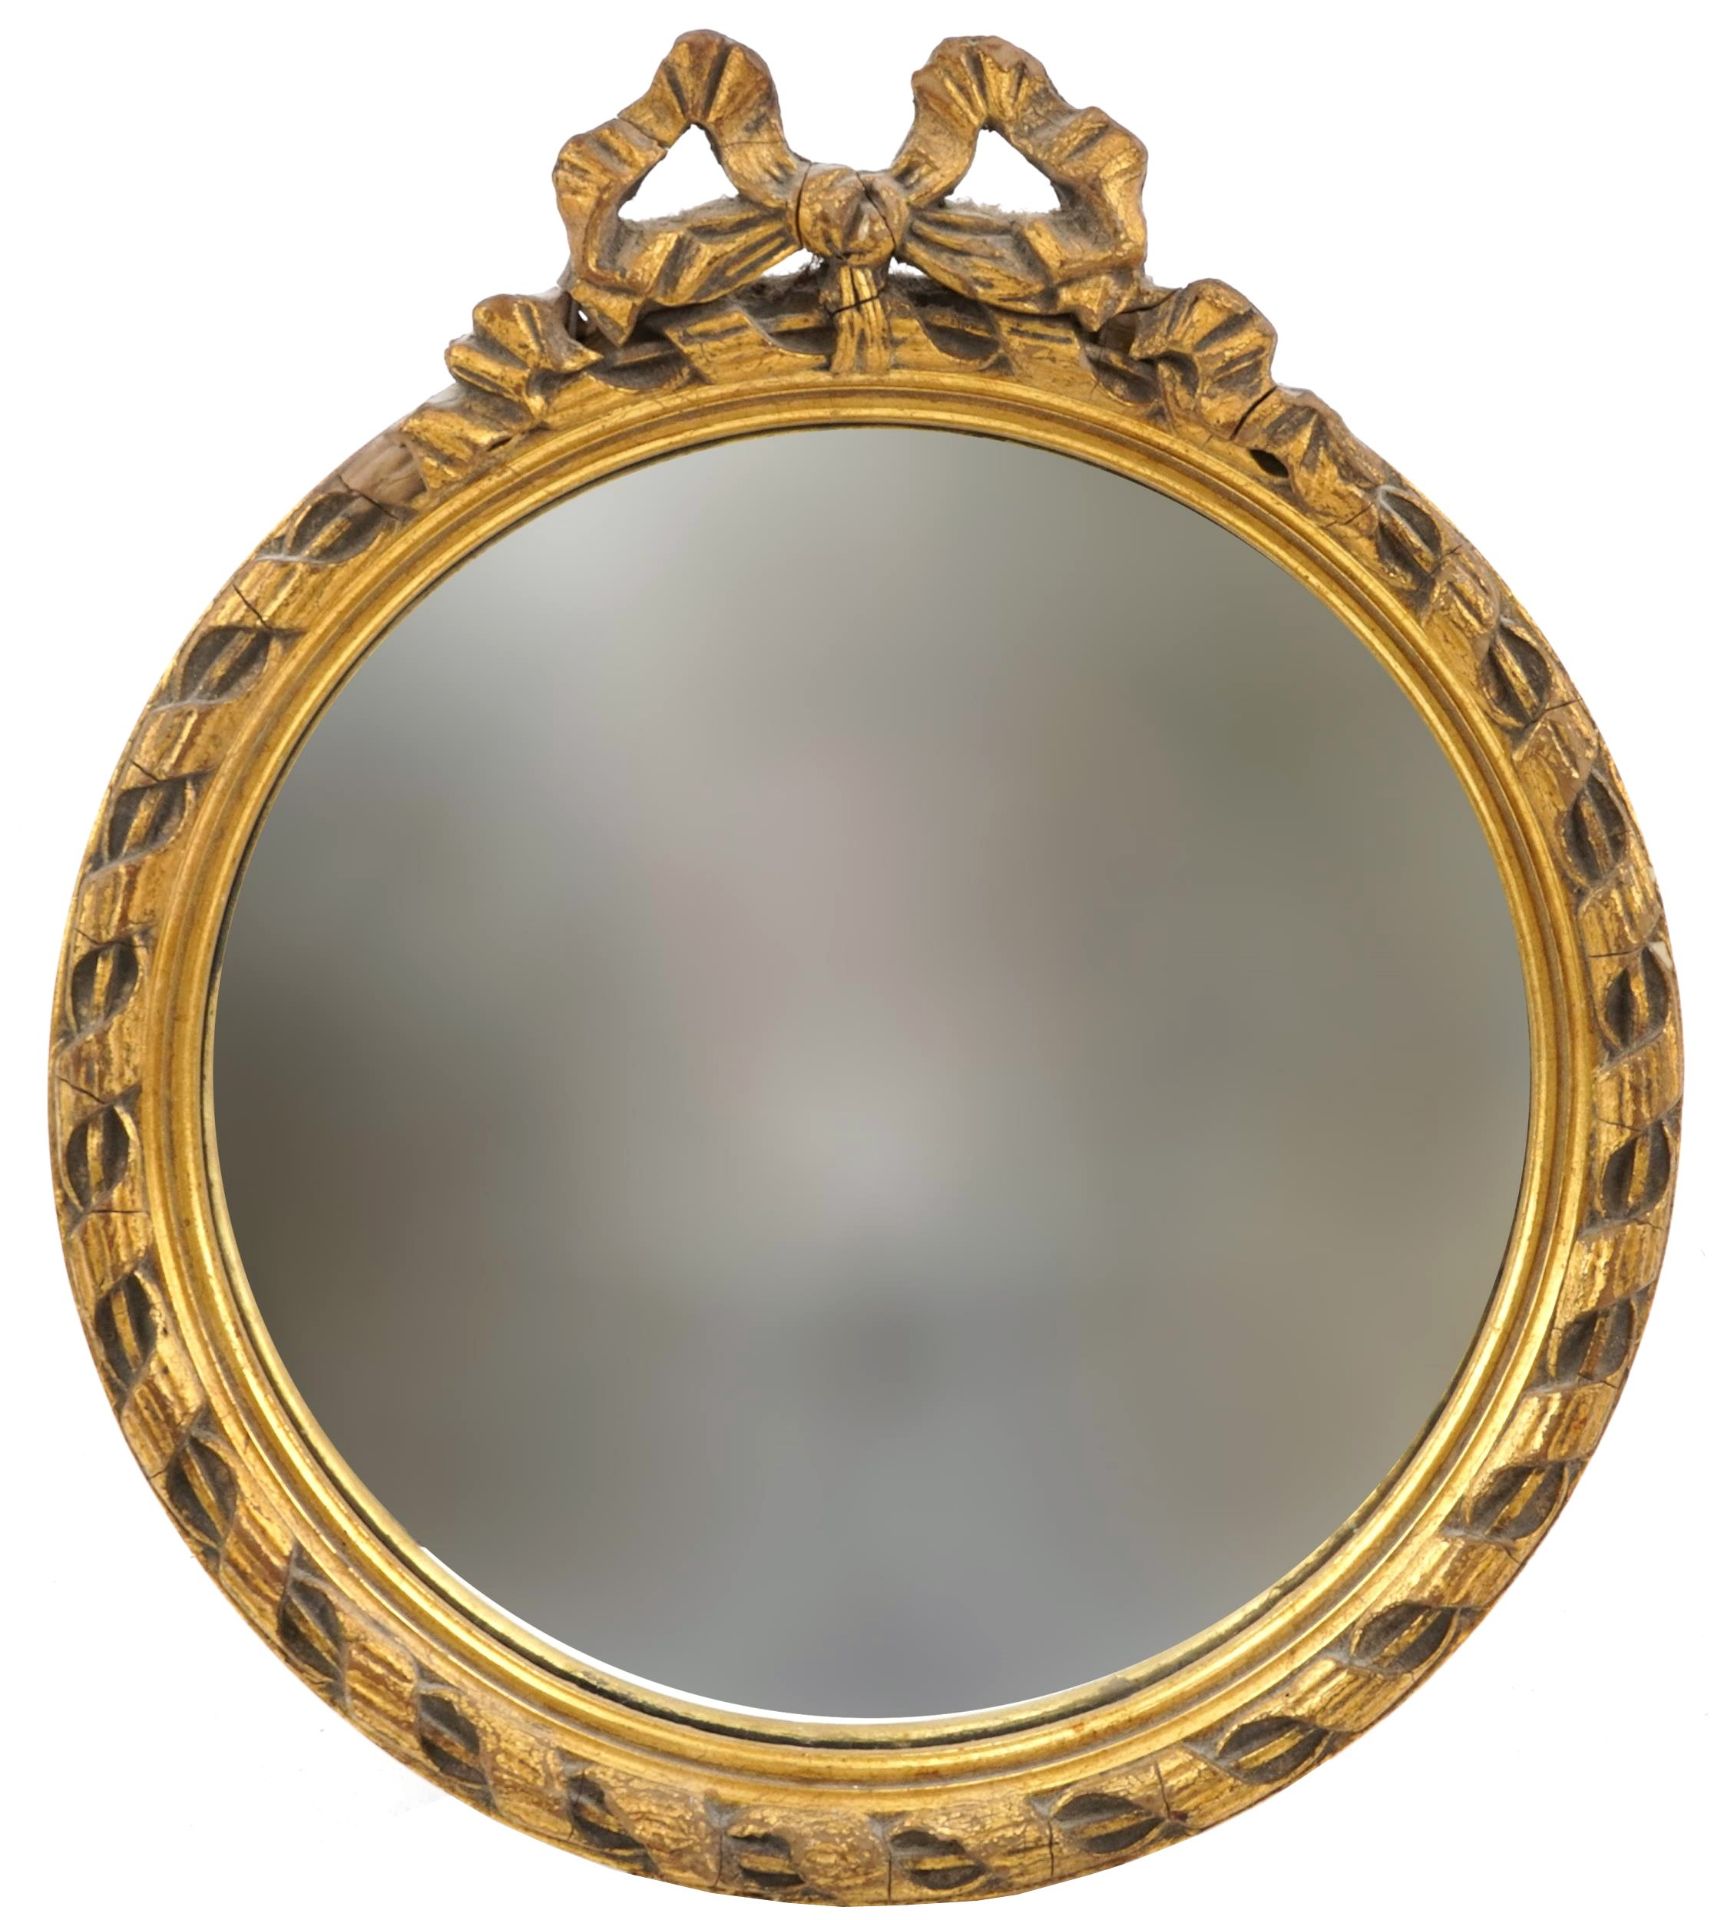 Circular gilt framed convex wall mirror with bow crest, 33cm high : For further information on